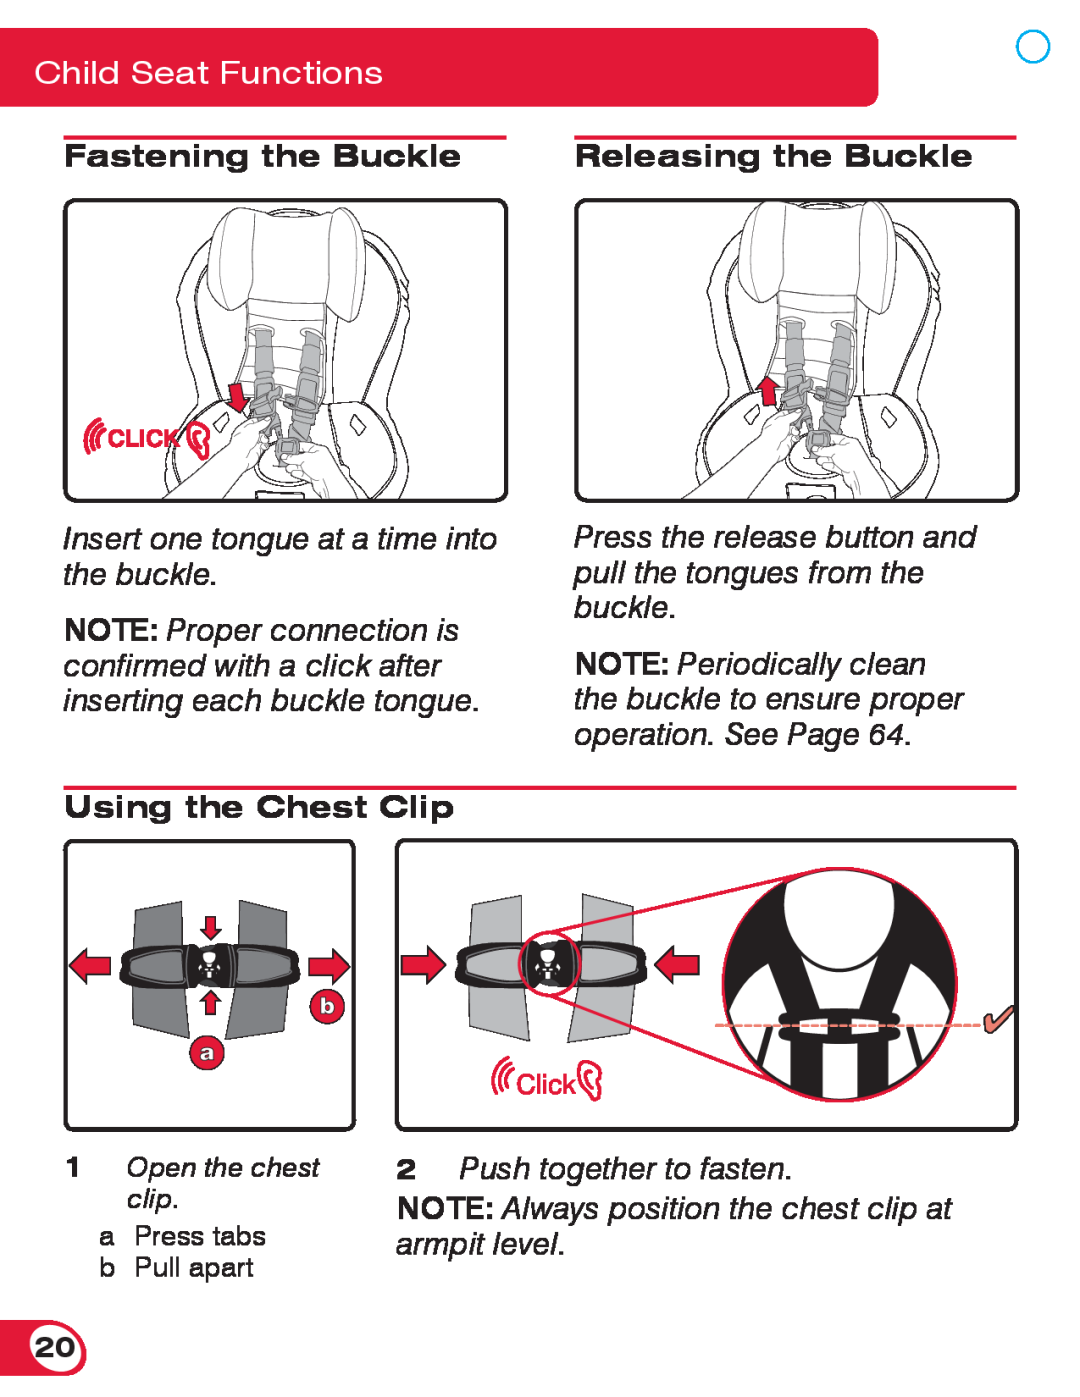 Britax 70 CS manual Fastening the Buckle, Releasing the Buckle, Using the Chest Clip, Child Seat Functions 